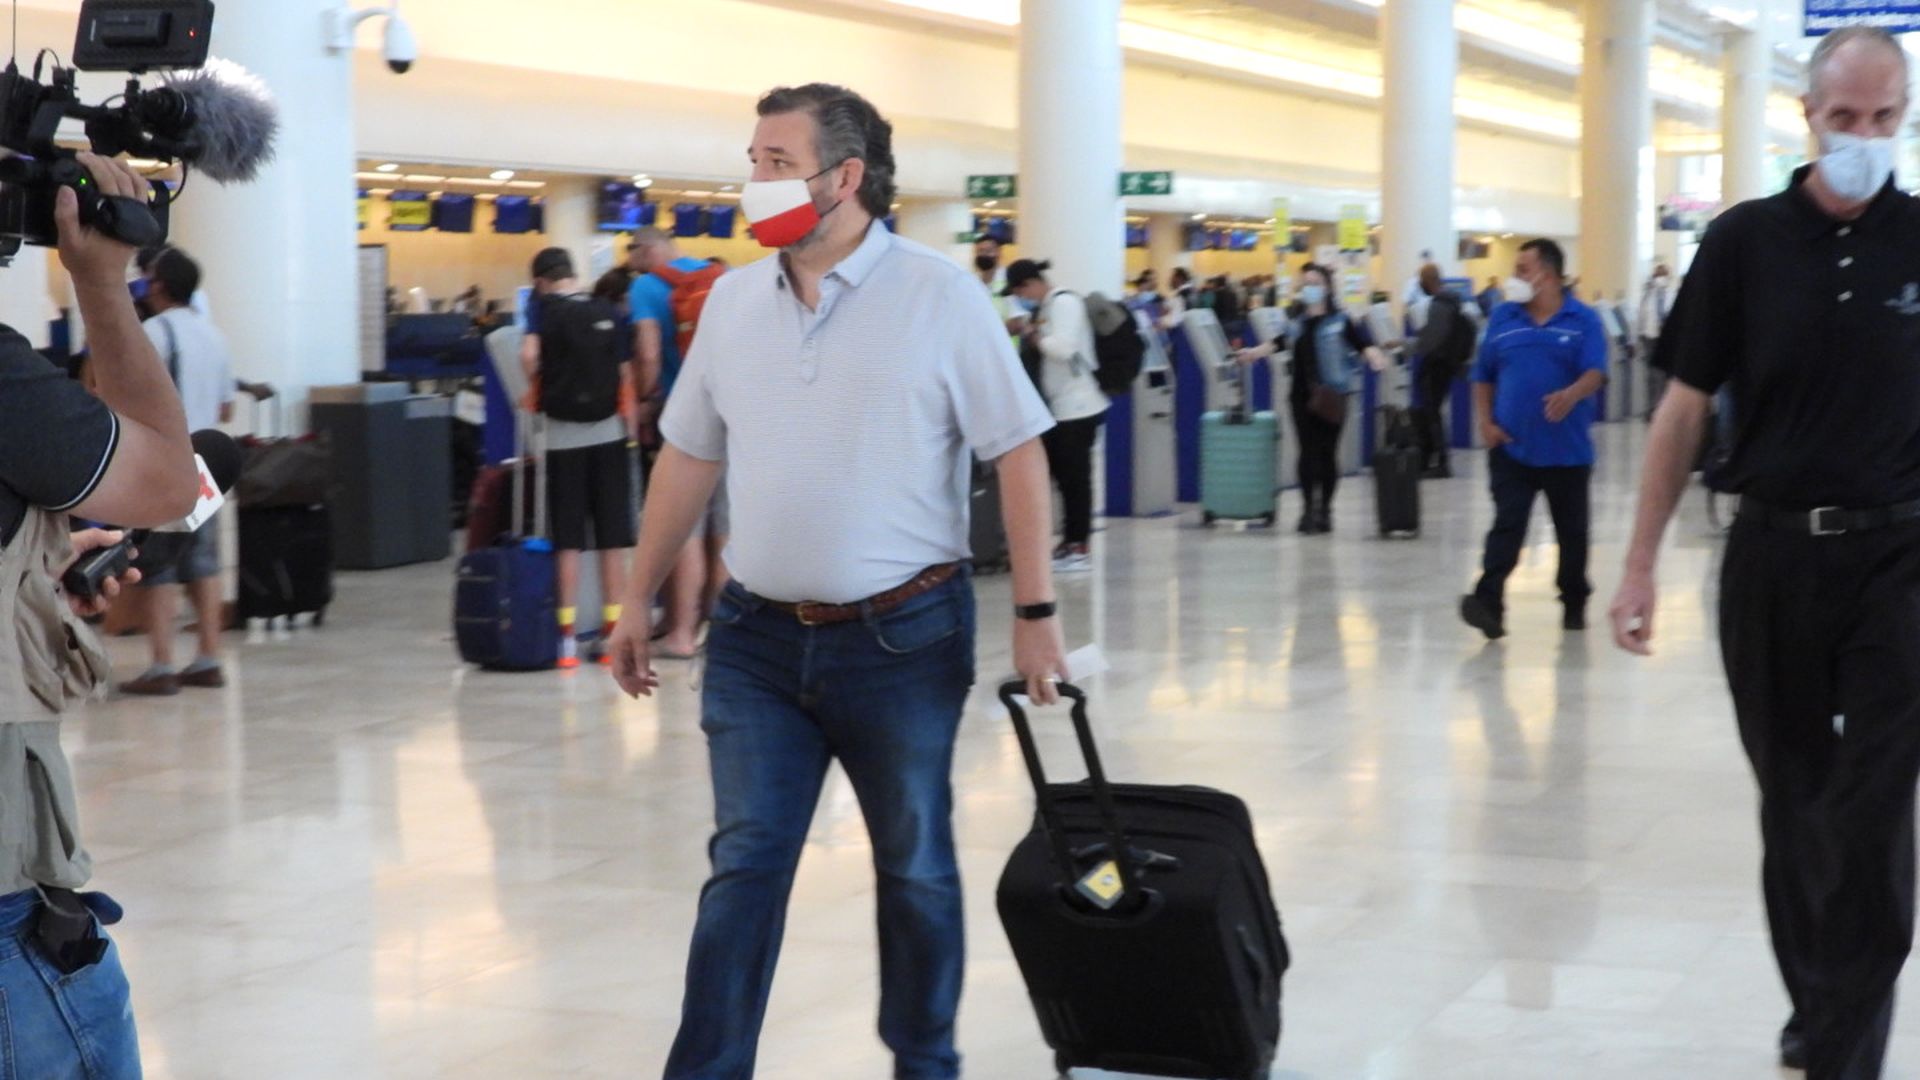 Ted Cruz in the airport